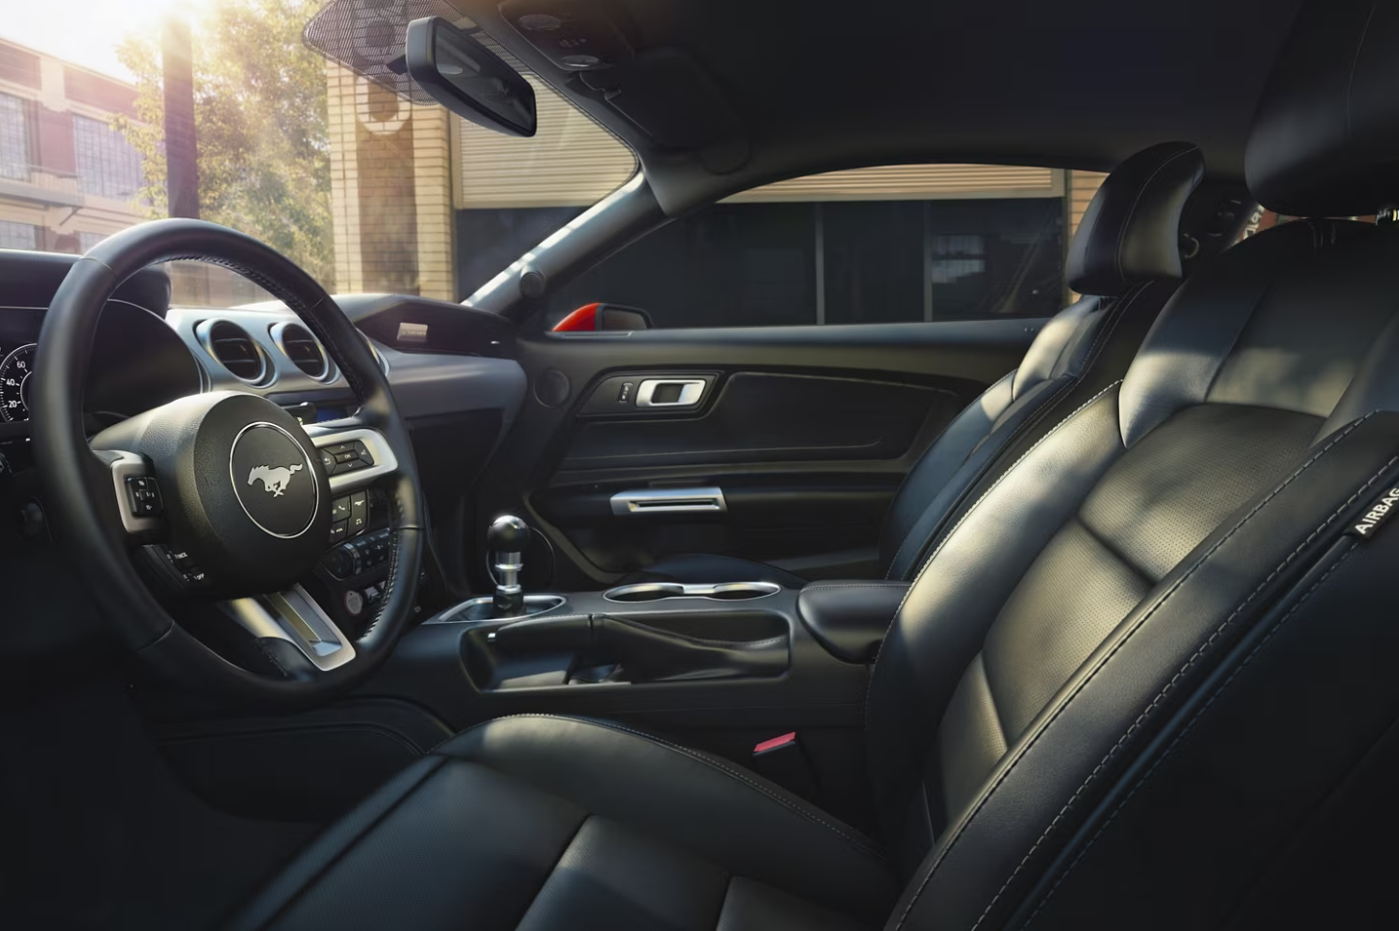 The black leather upholstered seating and all black cabin of a 2023 Ford Mustang